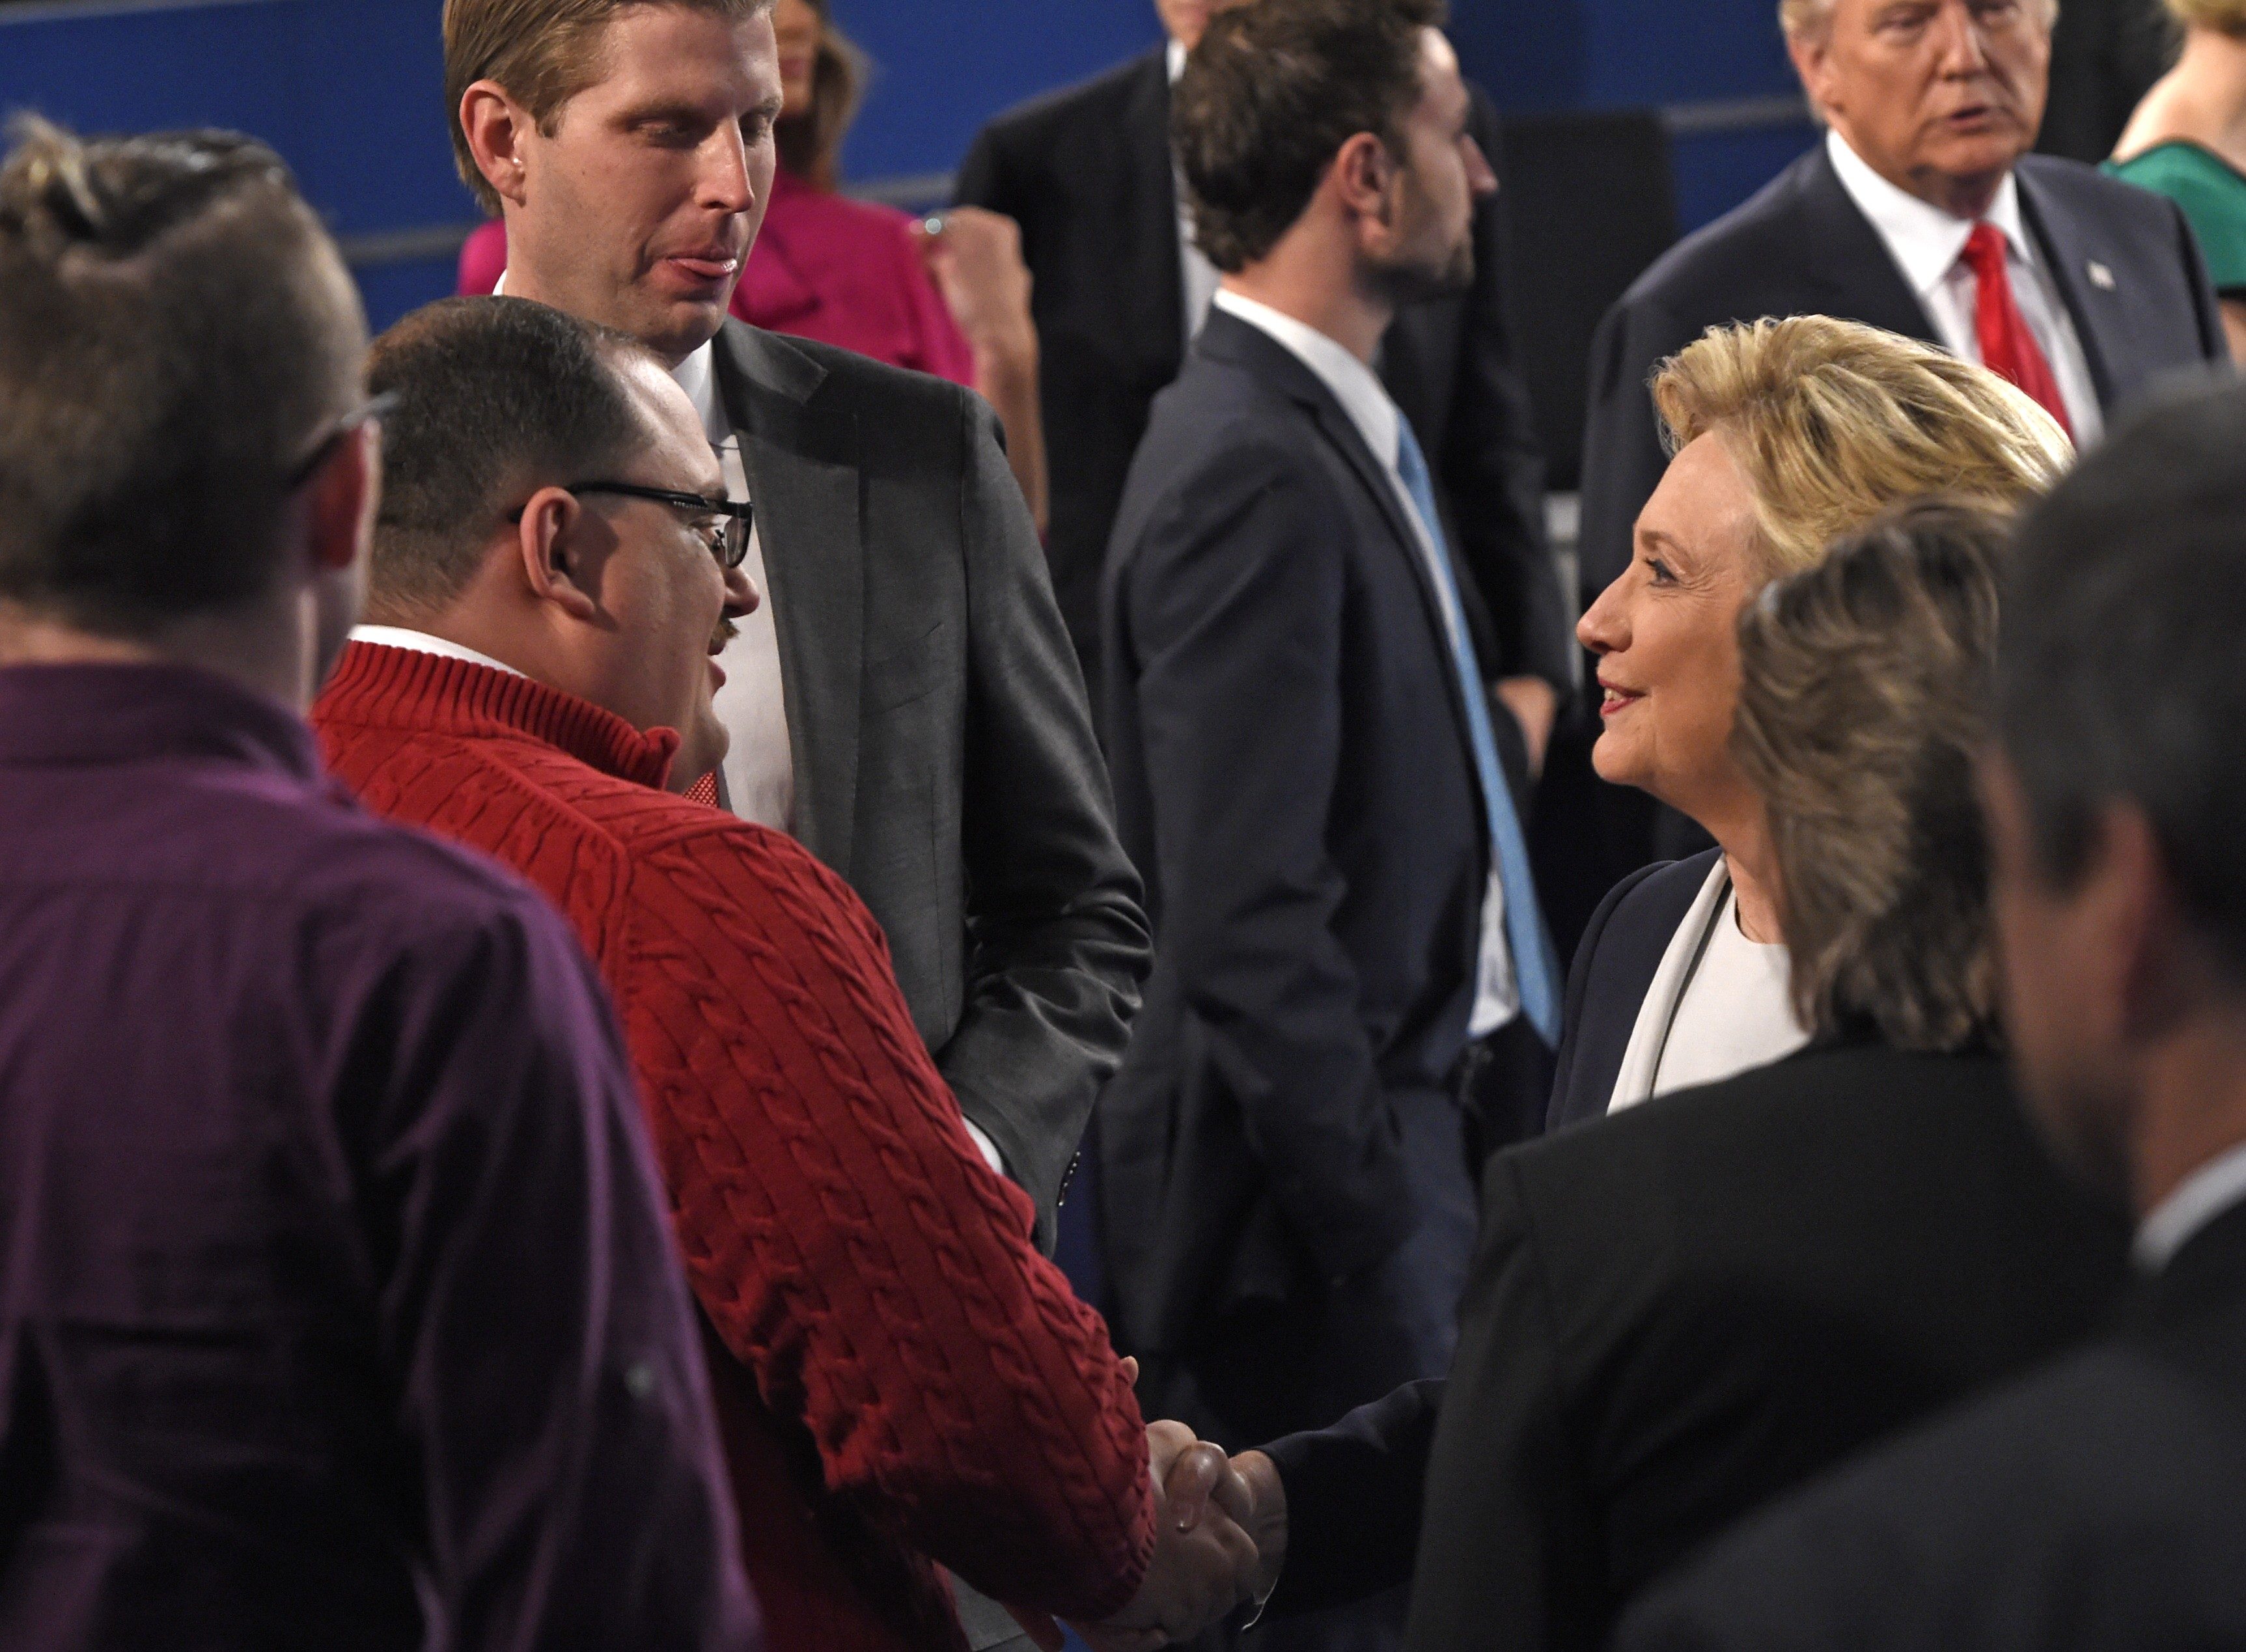 (FILES) In this file photo dated October 9, 2016 US Democratic Presidential nominee Hillary Clinton (R) shakes hands with Ken Bone following the second presidential debate with Republican nominee Donald Trump (far R background) at Washington University in St. Louis, Missouri. As the mud flew at Donald Trump and Hillary Clinton's second presidential debate Sunday, the American everyman became an instant celebrity by calmly asking a question about energy policy. Bone -- even his sturdy name has been a source of amusement on social media -- had been picked to represent undecided voters at the town hall-style debate in St Louis, Missouri. His heft, poise and polite manner offered a brief but refreshing respite from the 90-minute slug-fest between the Republican and Democratic candidates. / AFP PHOTO / POOL / SAUL LOEB / TO GO WITH AFP STORY "Ken Bone, everyman hero in a tawdry US campaign"